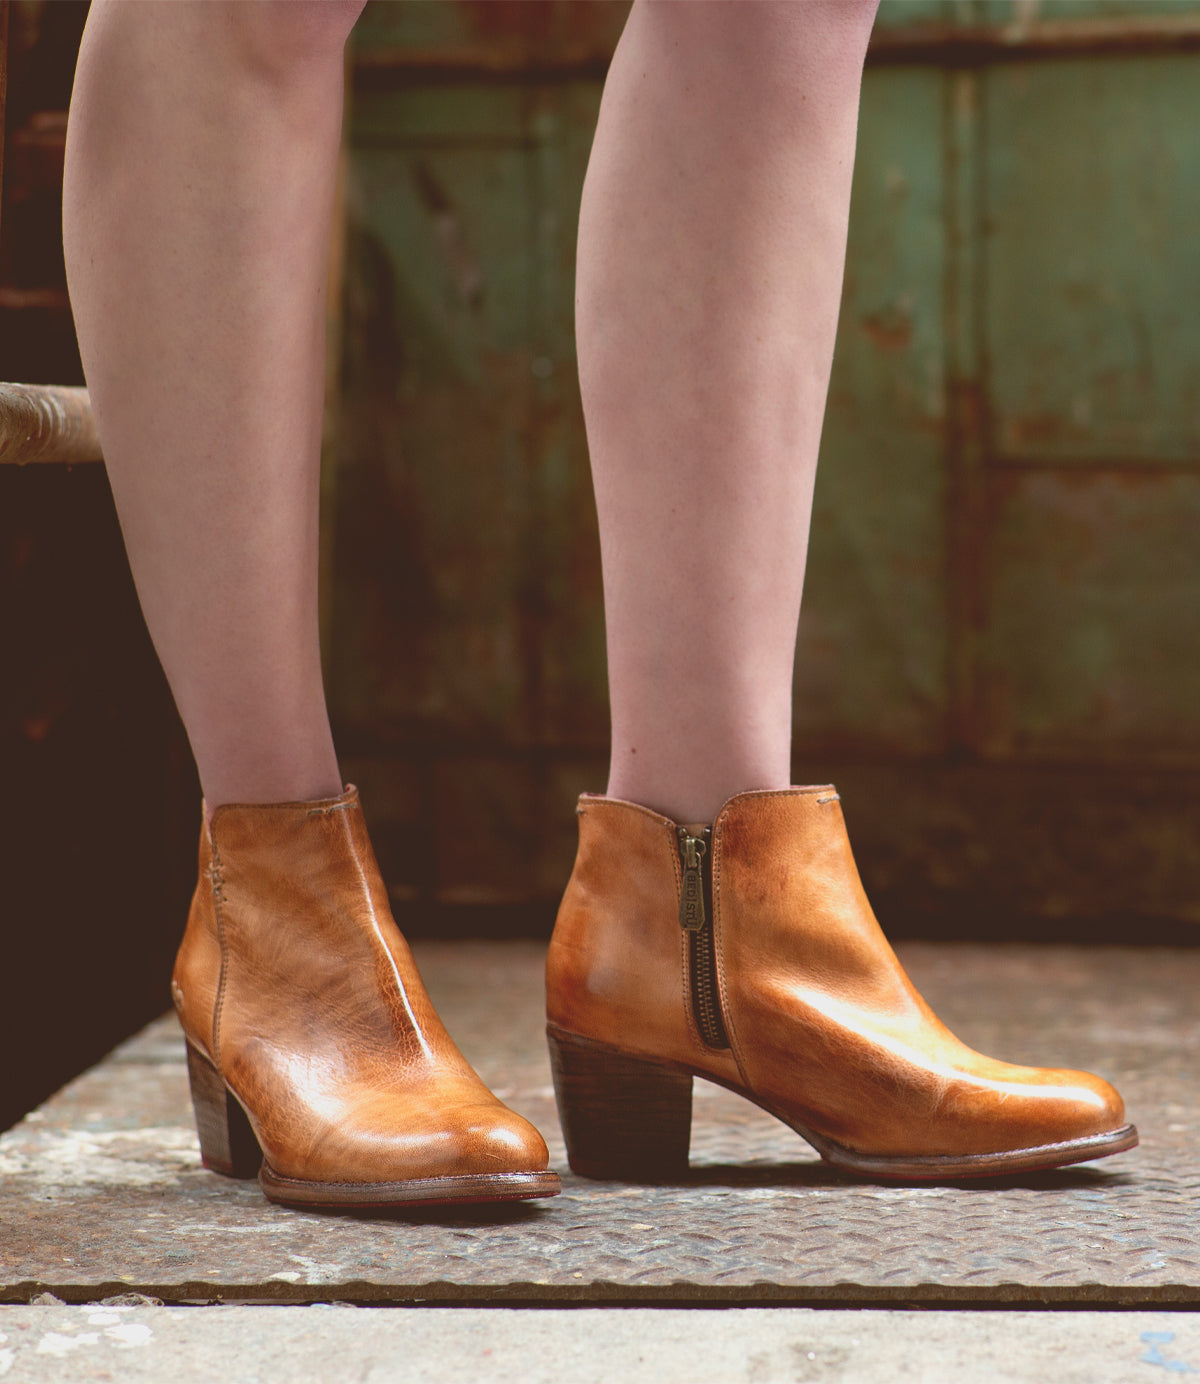 A woman donning a pair of high-heeled, tan leather Bed Stu Yell ankle boots.